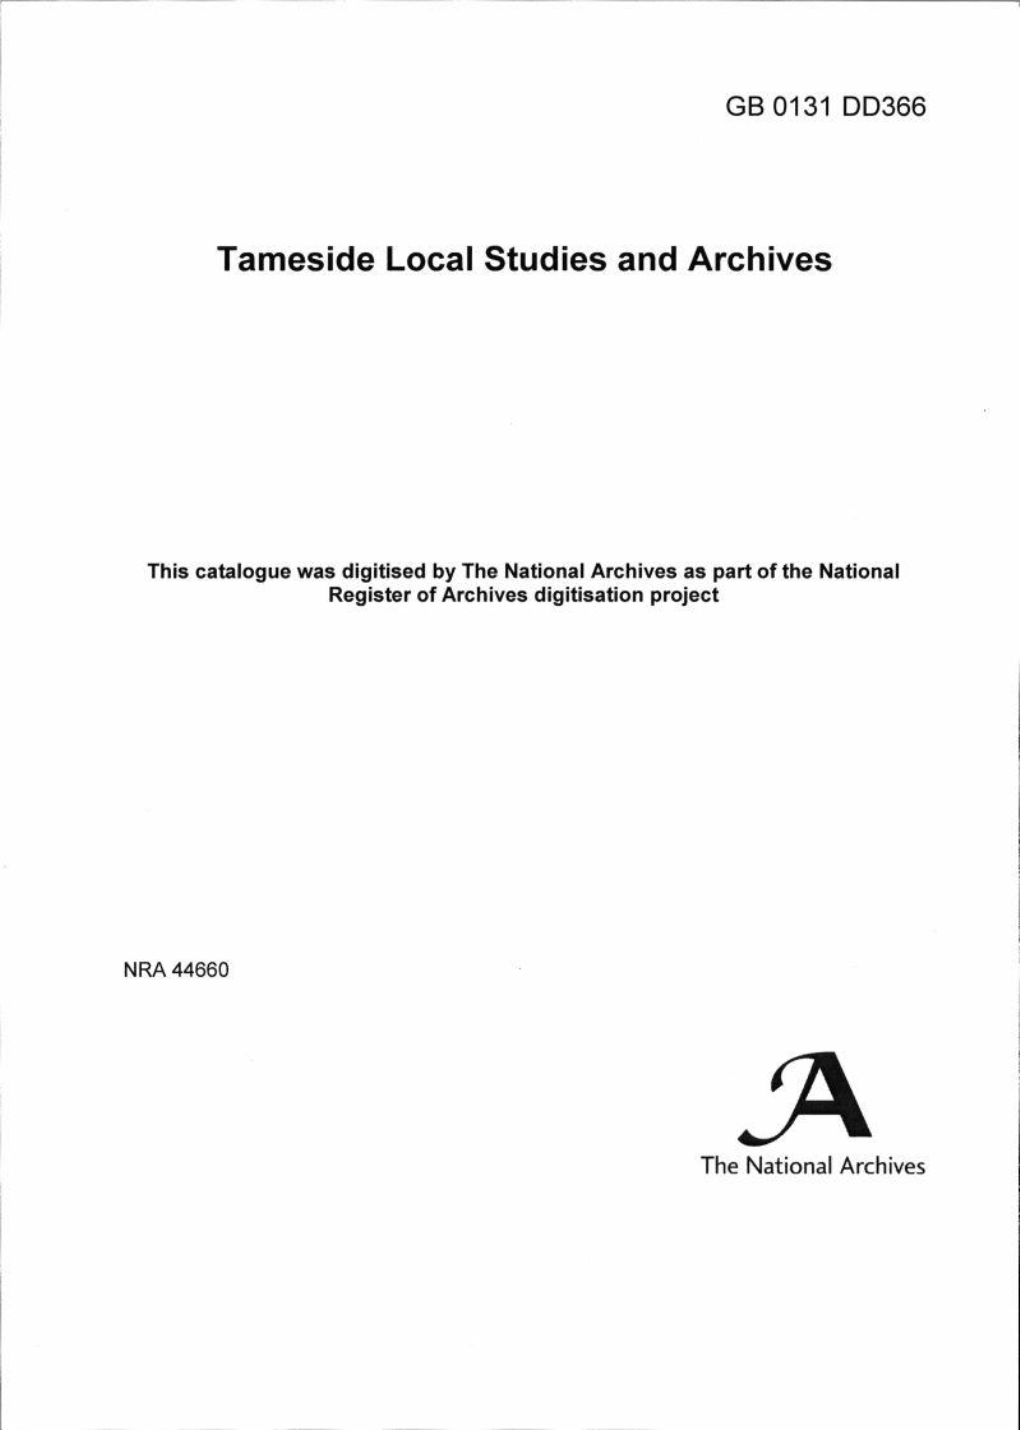 Tameside Local Studies and Archives